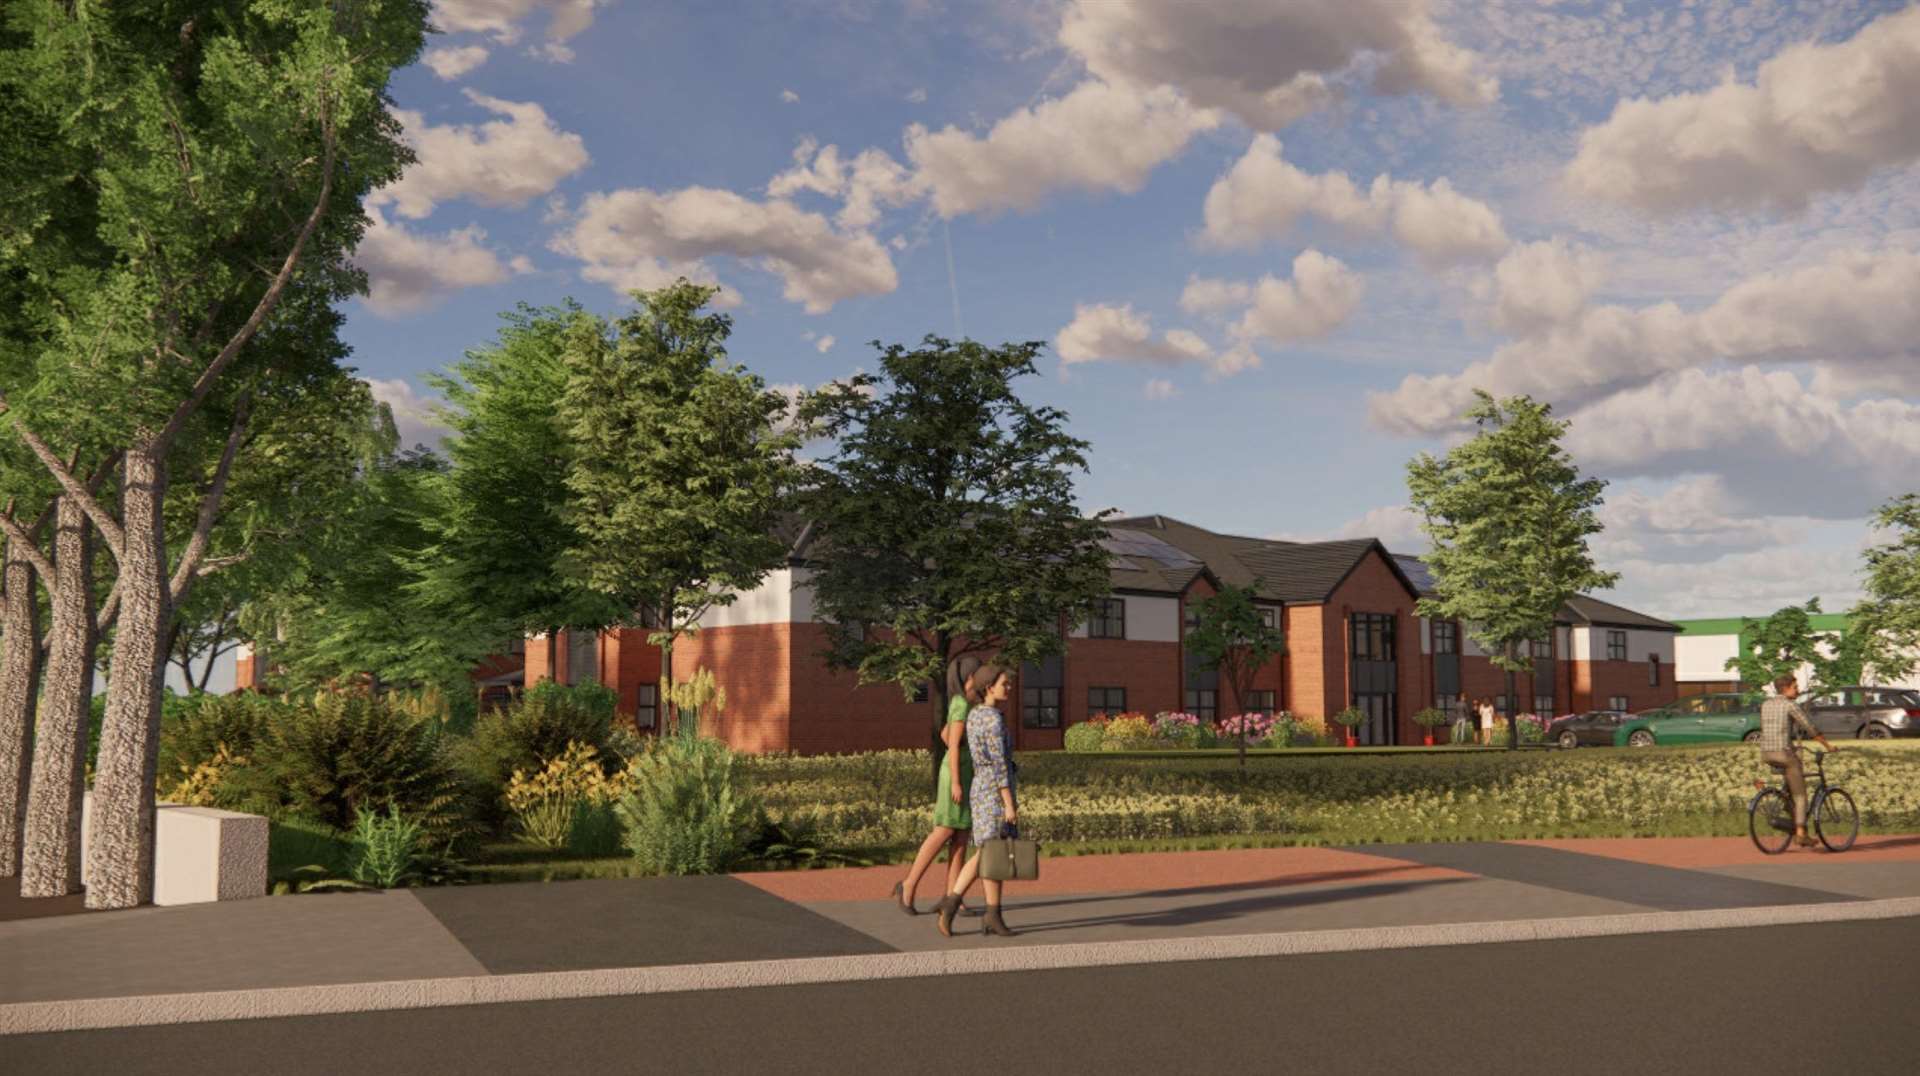 There are hopes that the new facility would help to address a lack of care beds in the area. Photo: LNT Care Developments